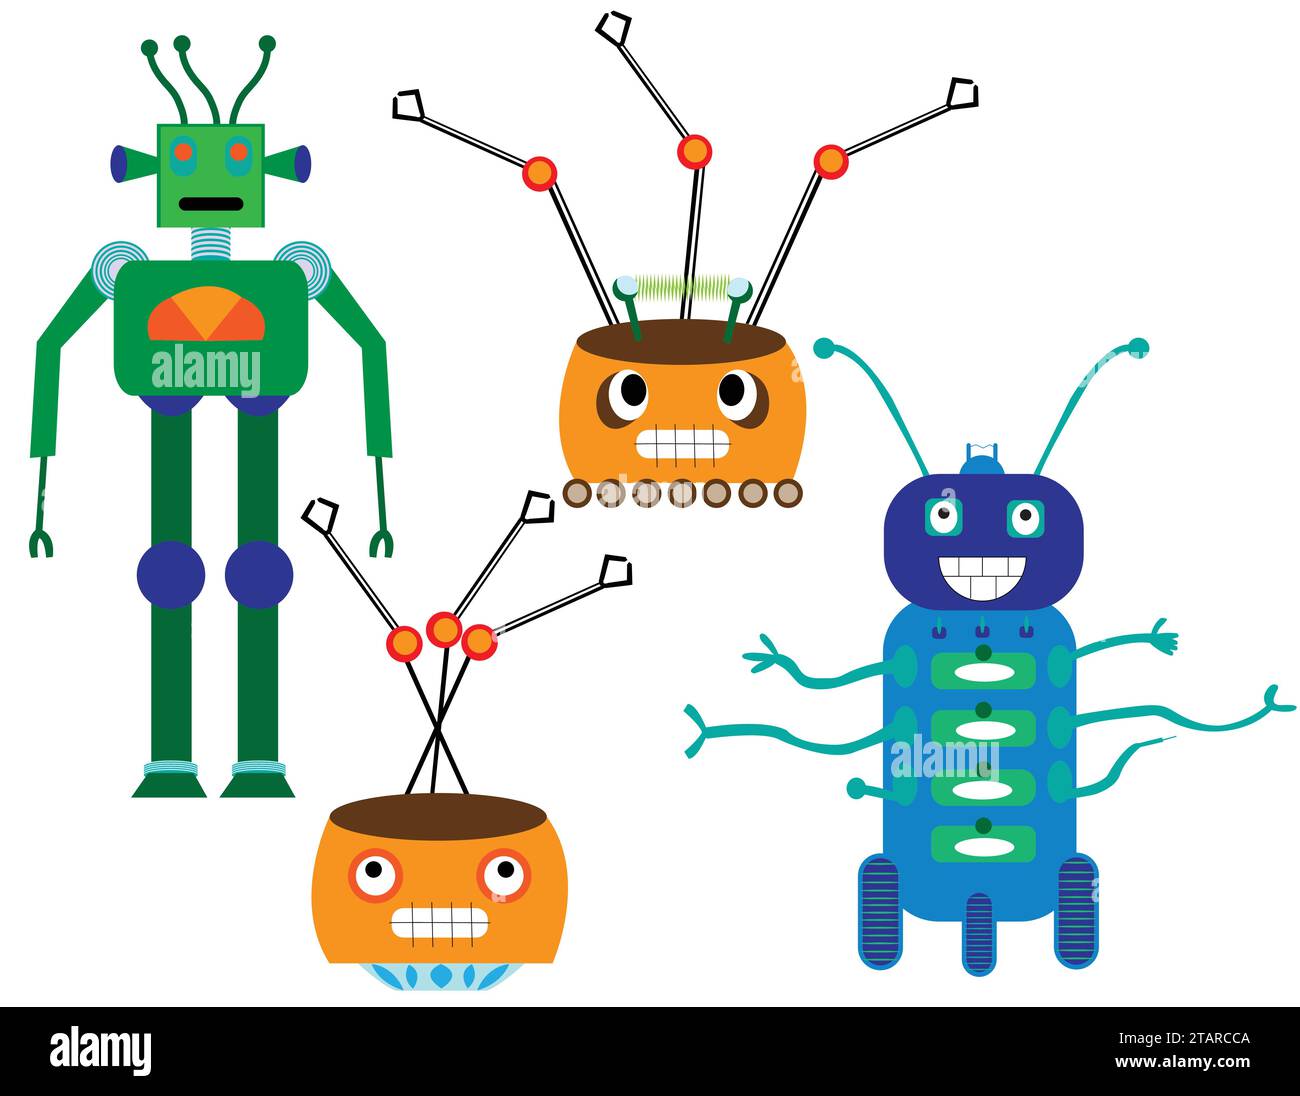 Robots isolated characters for various type of use; fous robots design, cartooned technology Stock Vector